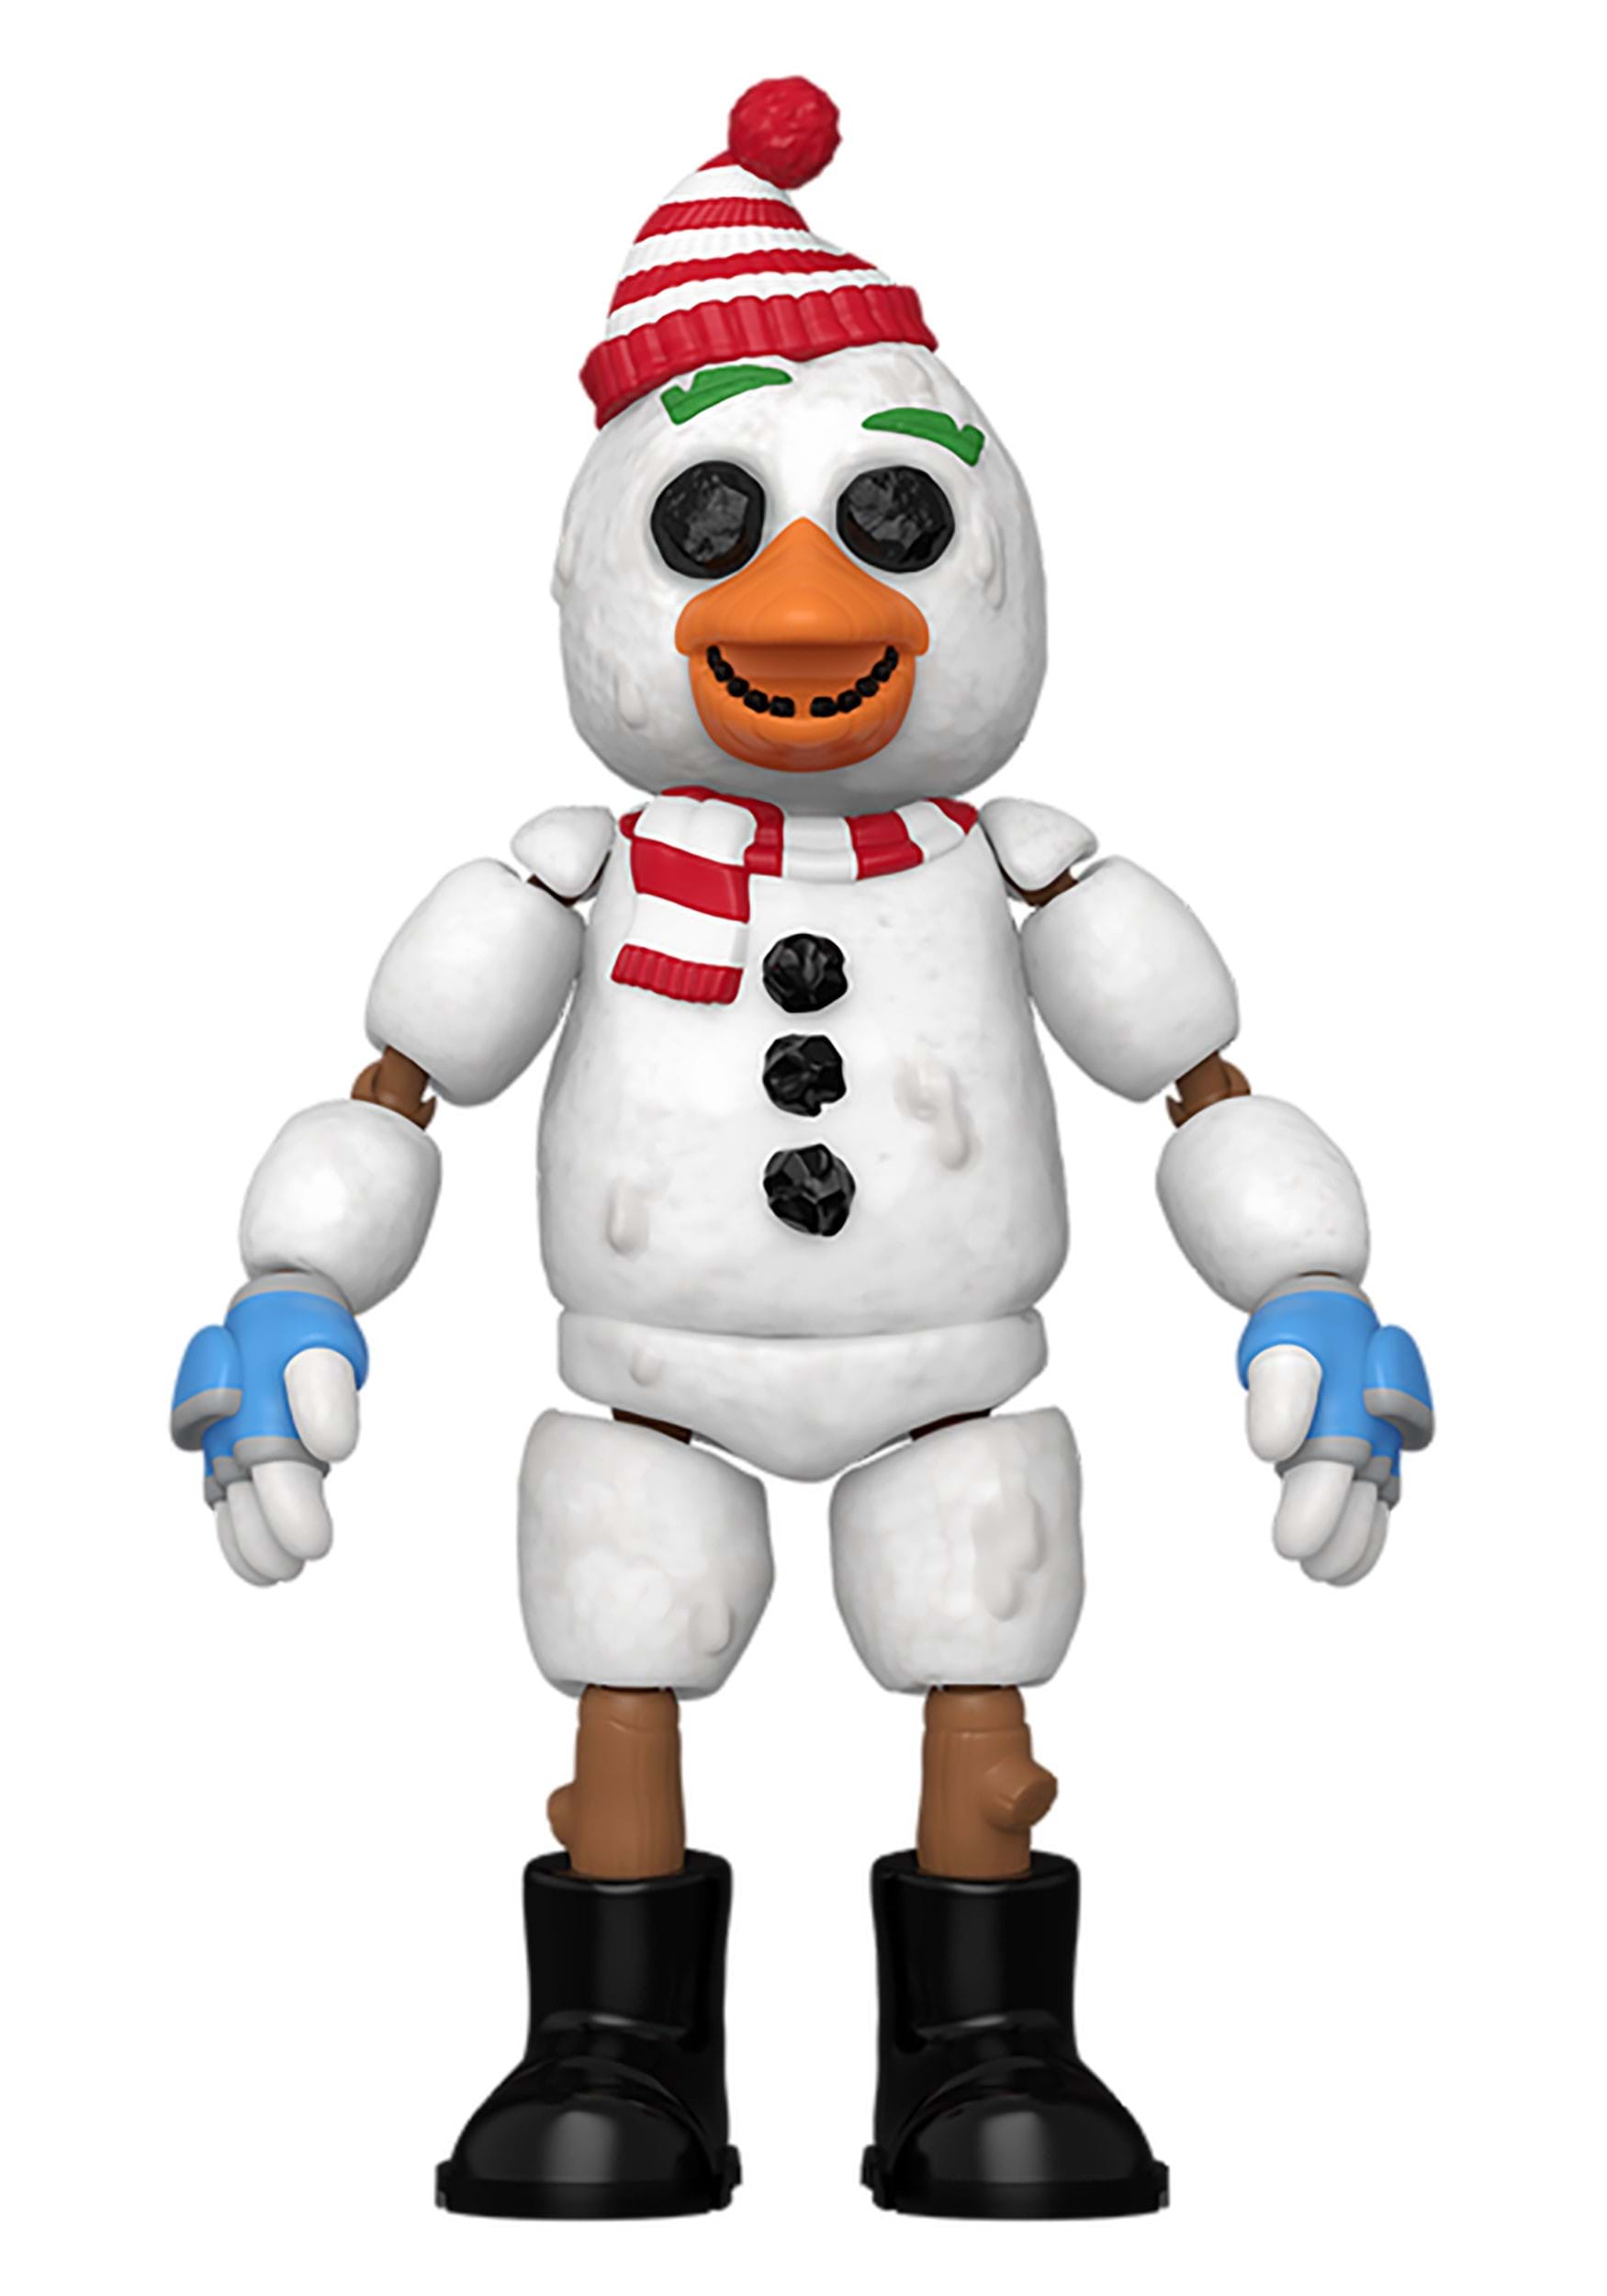 Five Nights at Freddys Snow Chica Funko Action Figure | Video Game Action Figures